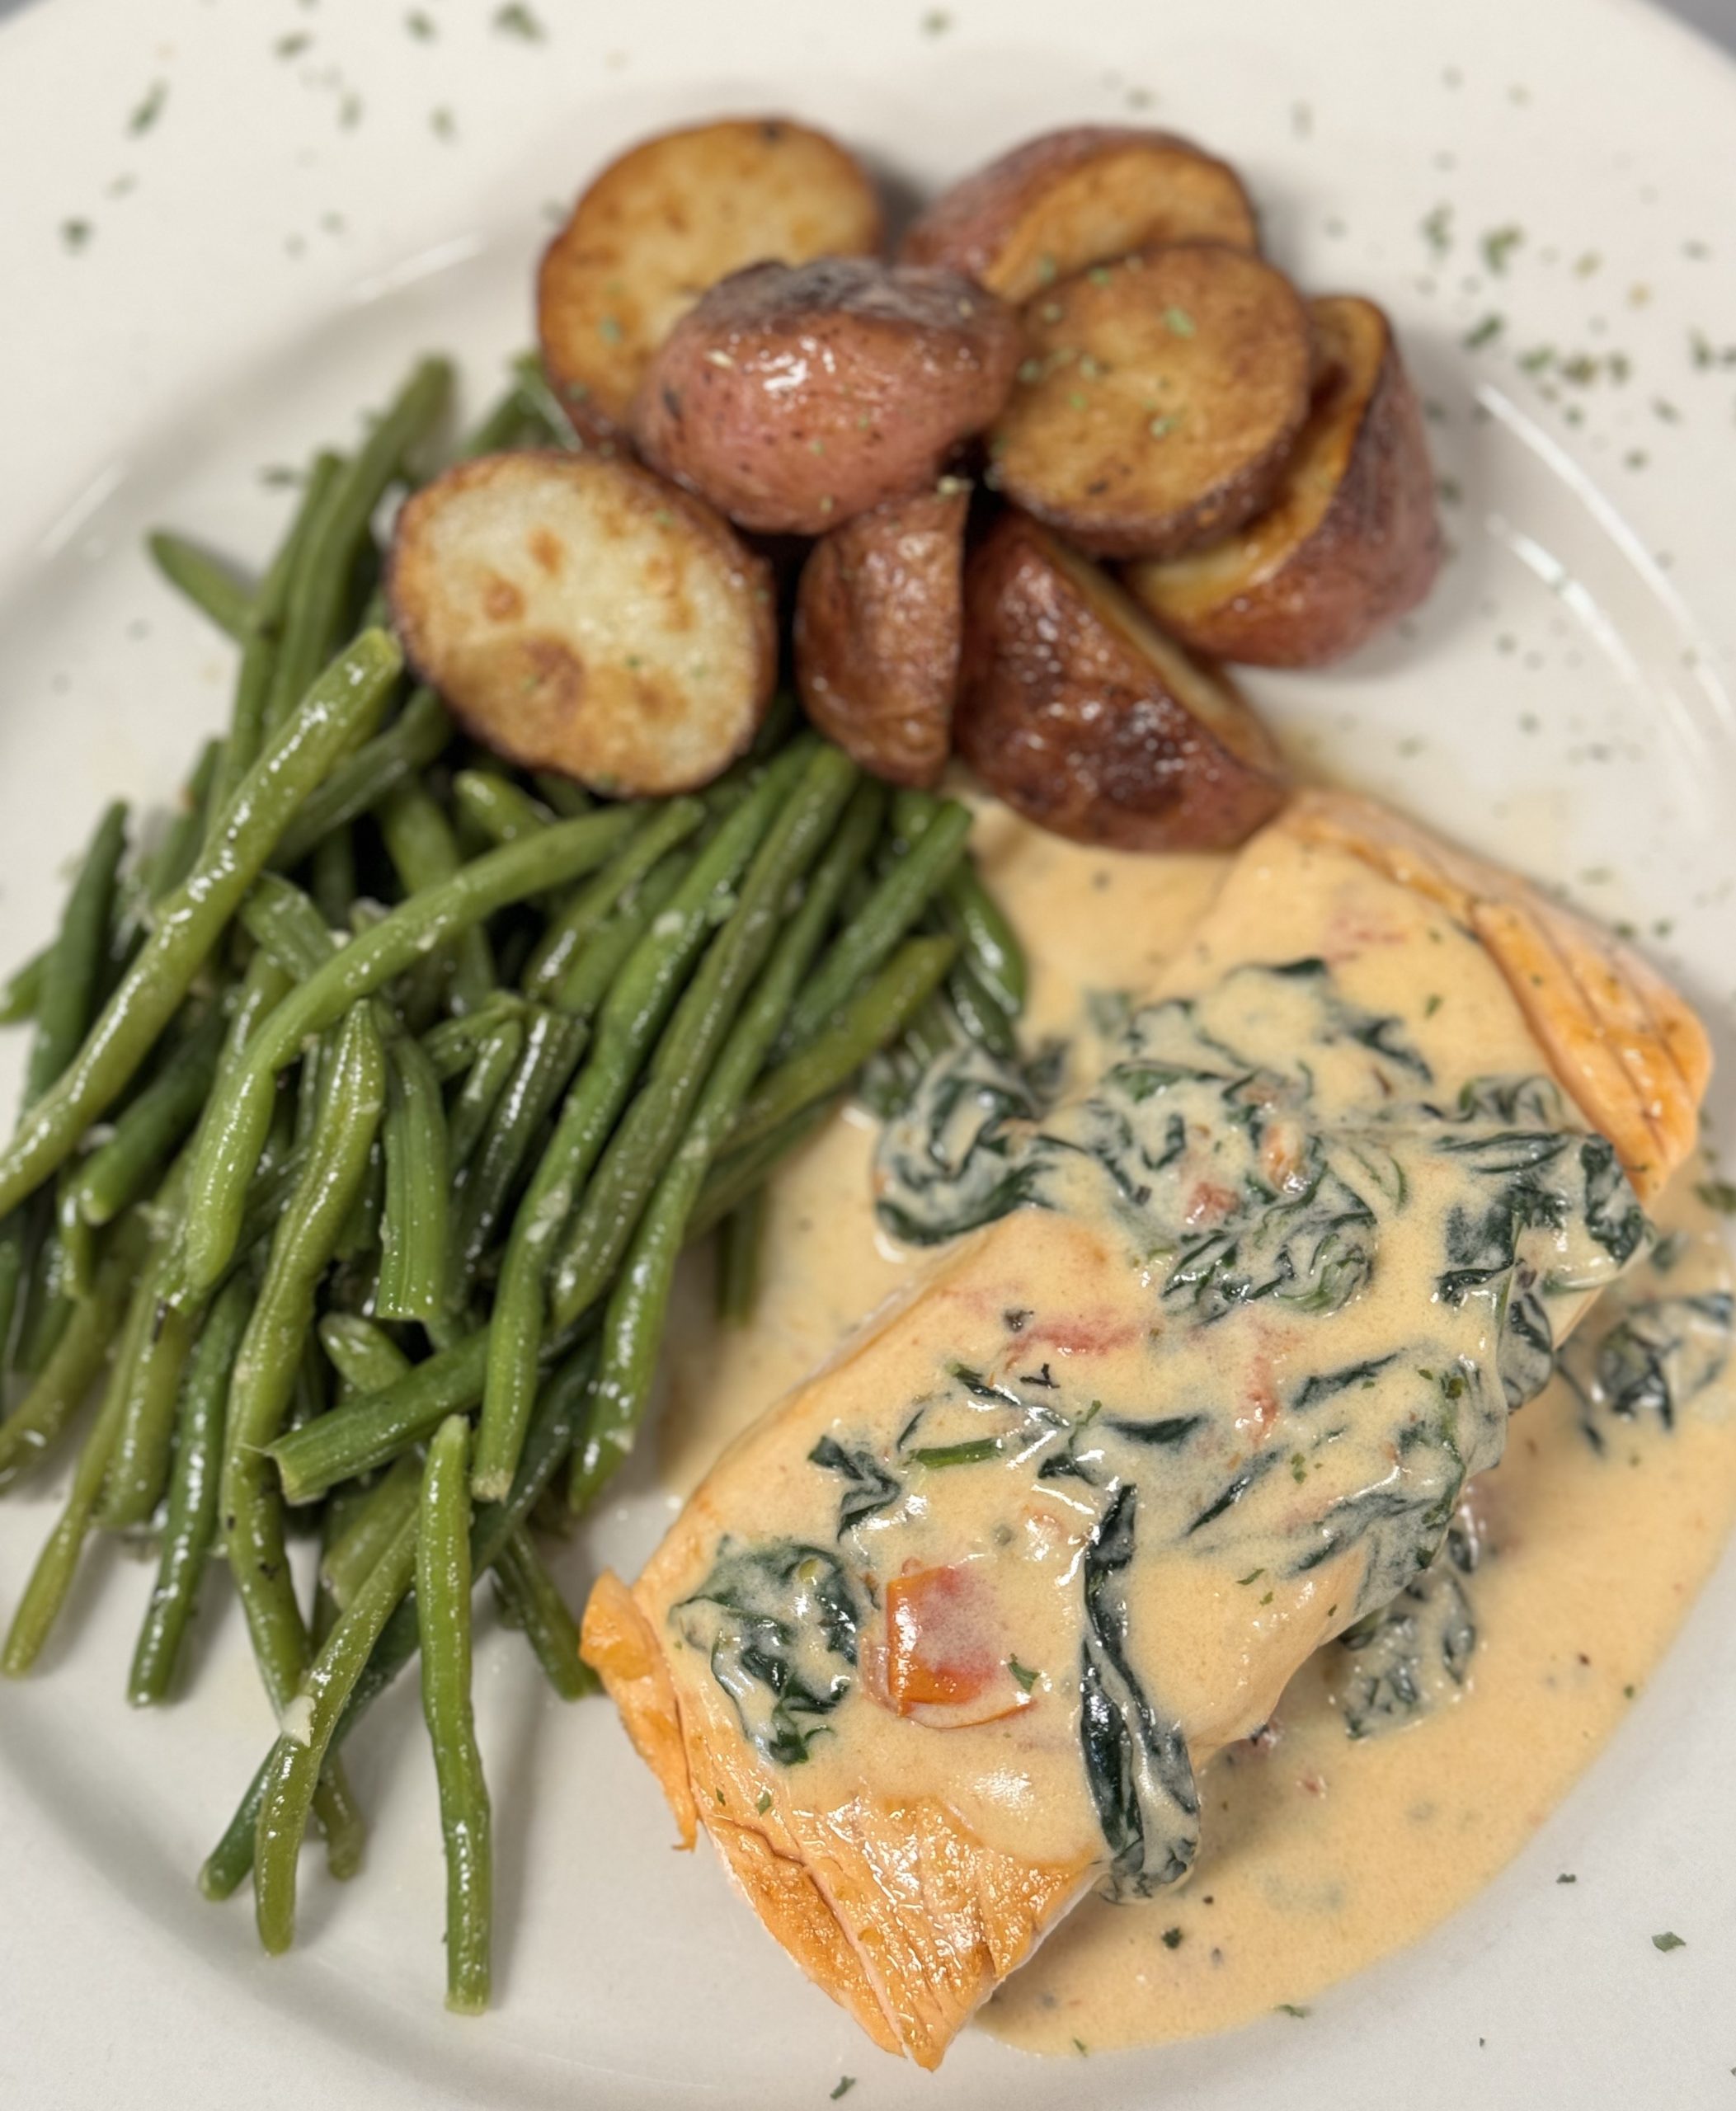 A plate with salmon, green beans and potatoes.